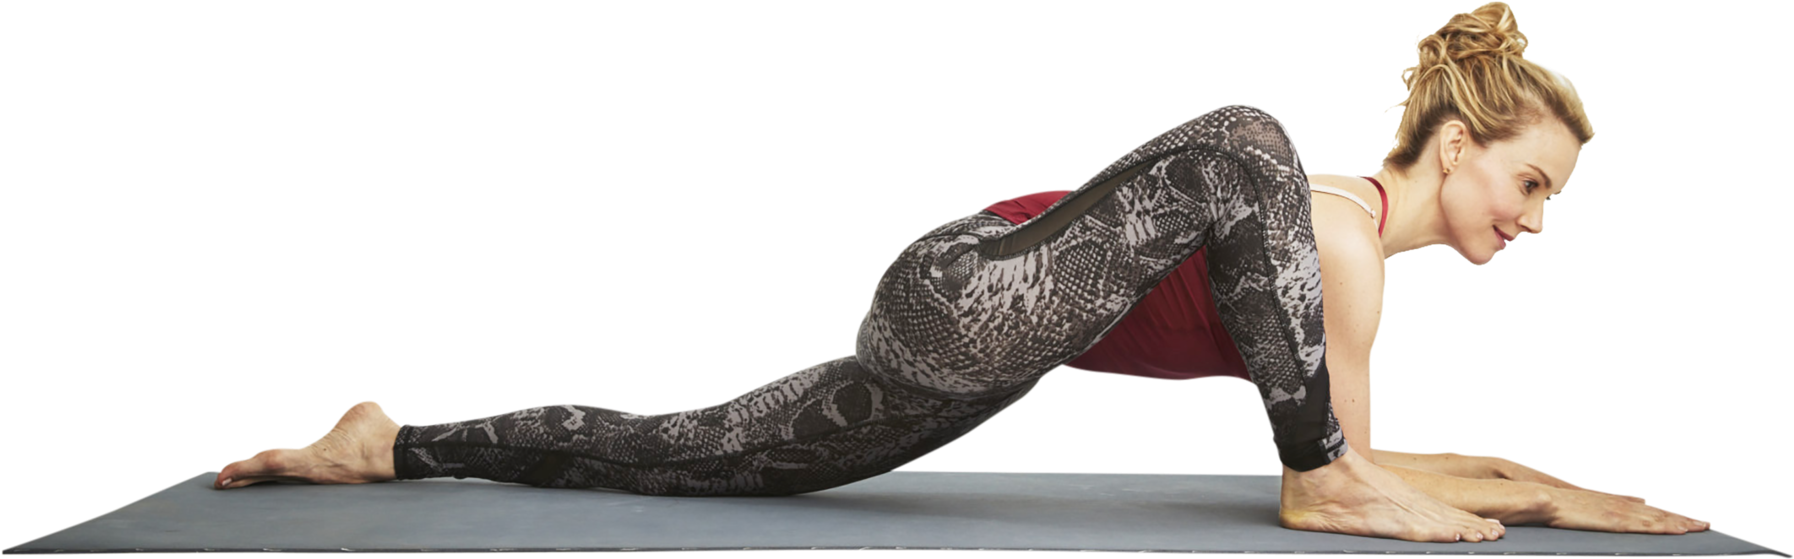 A Snake Skin And Red Fabric